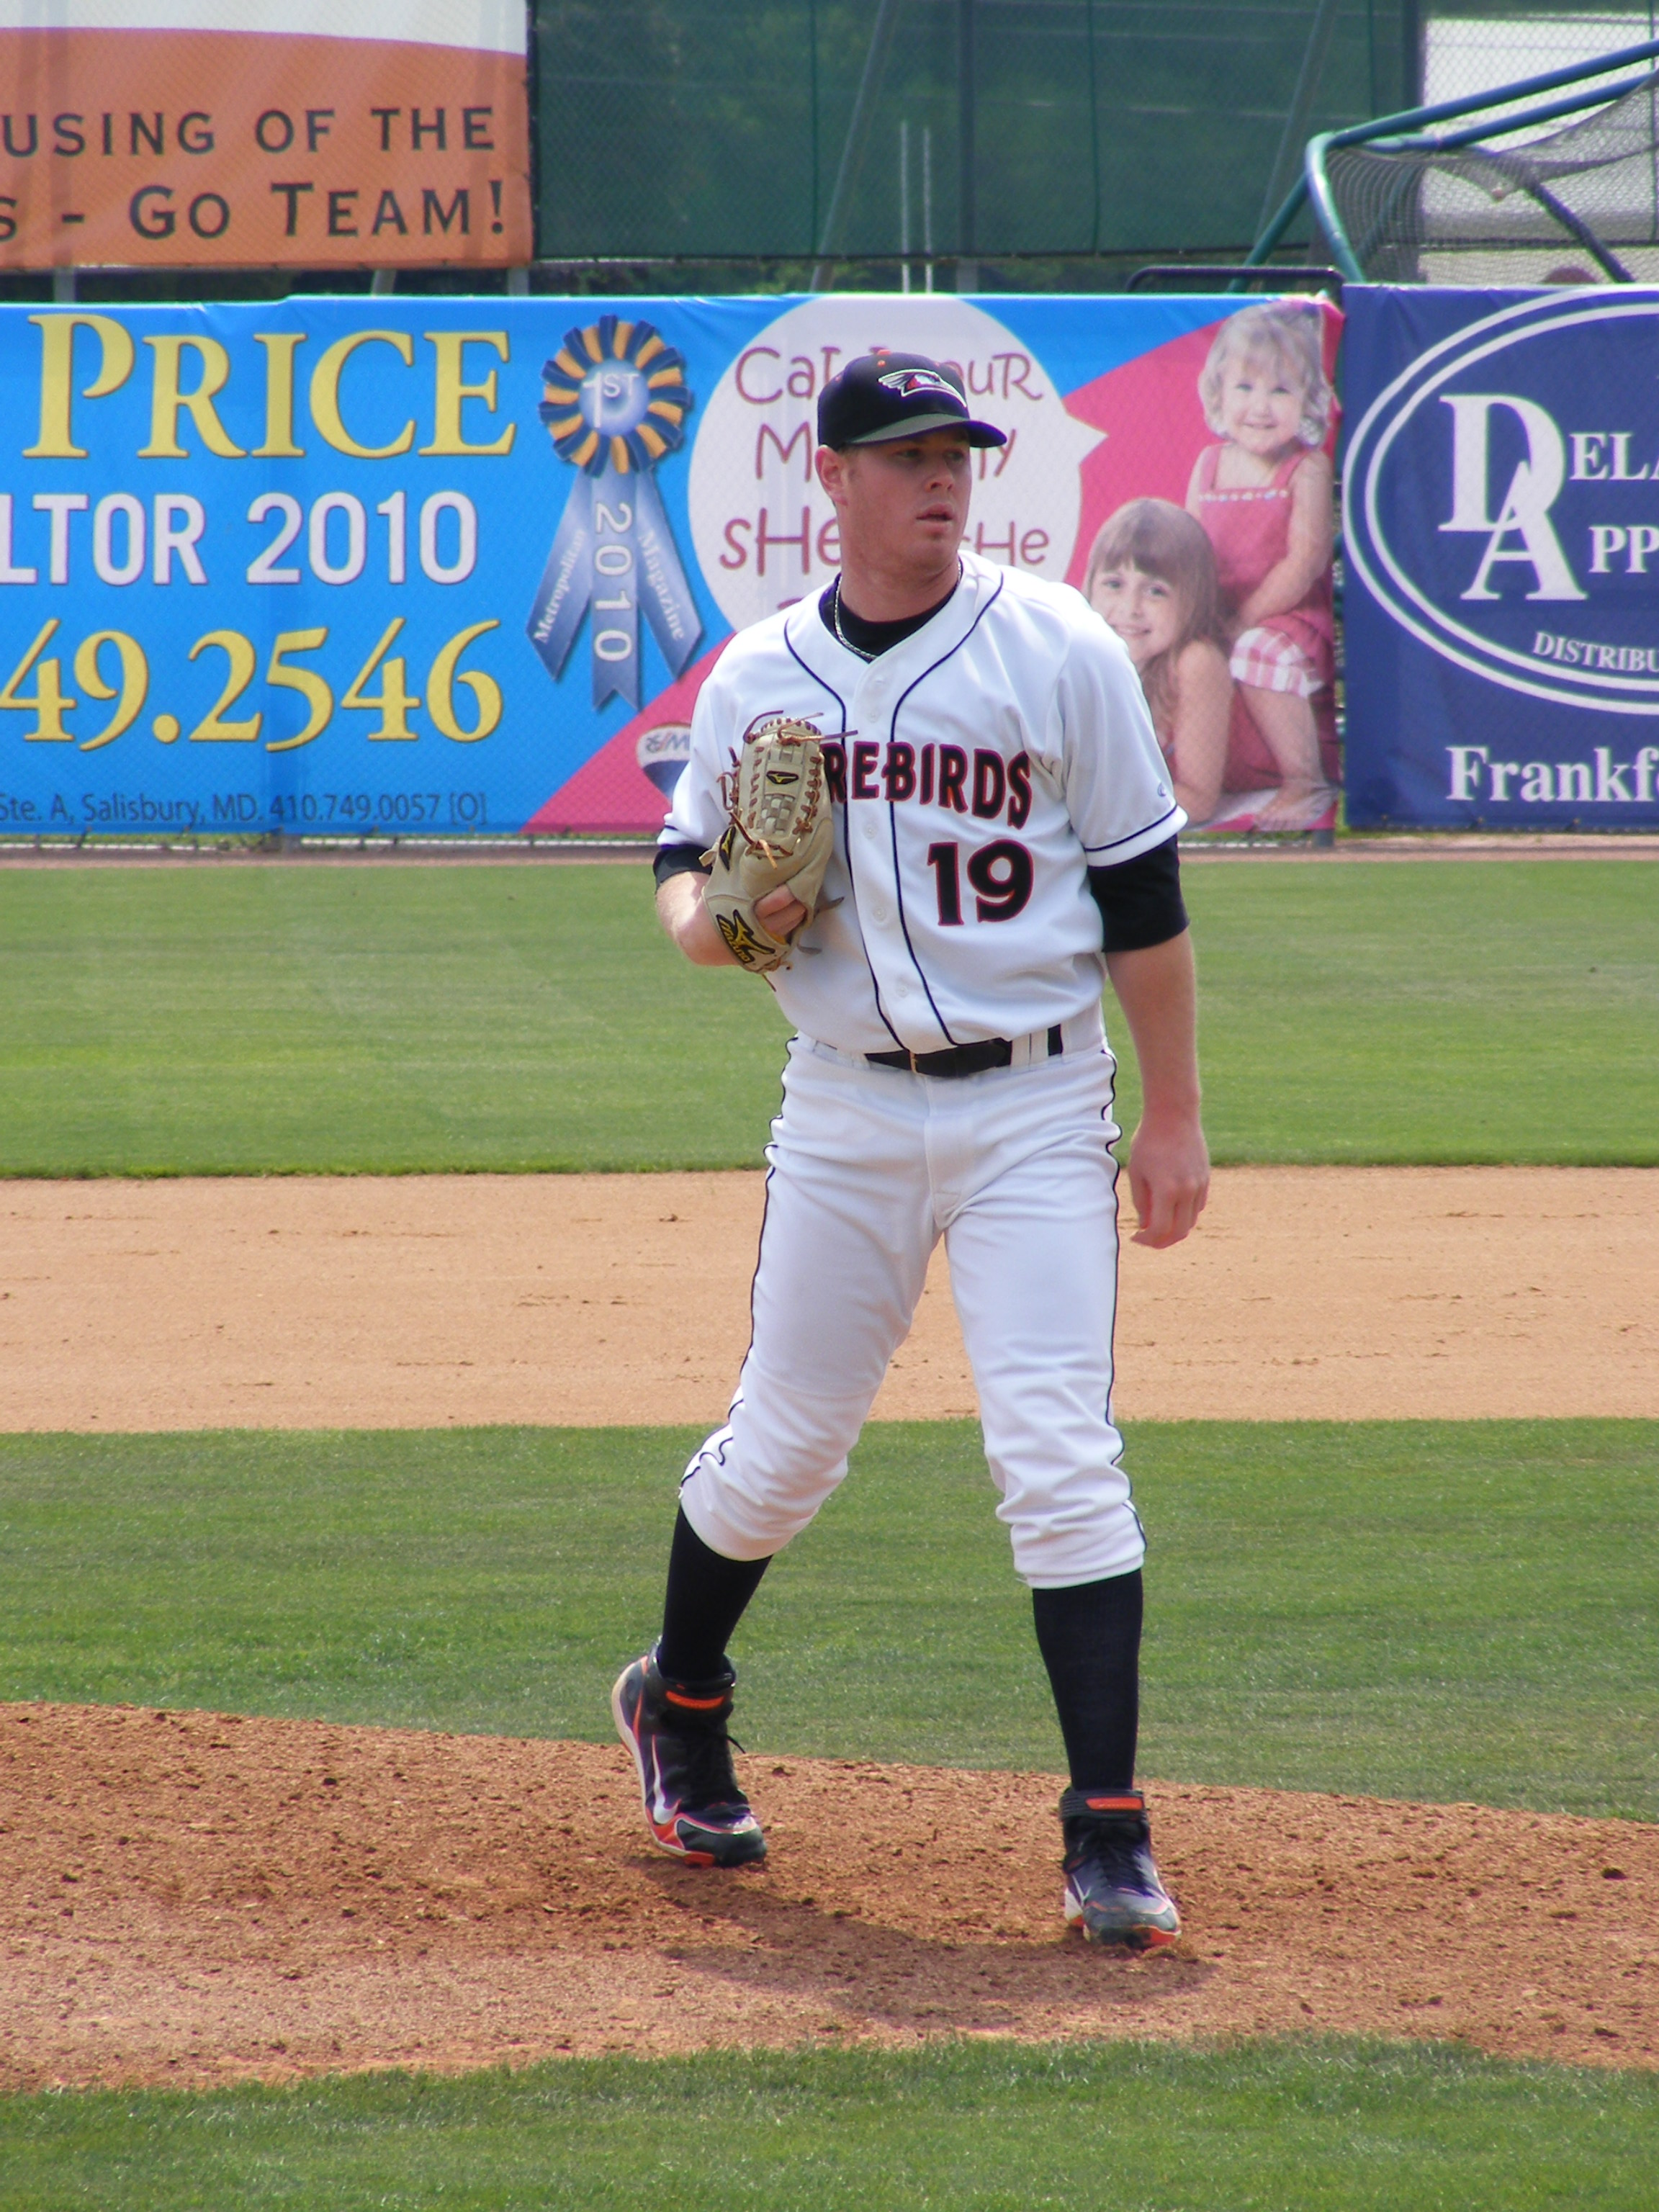 Cameron Roth has been the swingman for the Shorebirds, pitching mostly in long relief with a spot start here and there.